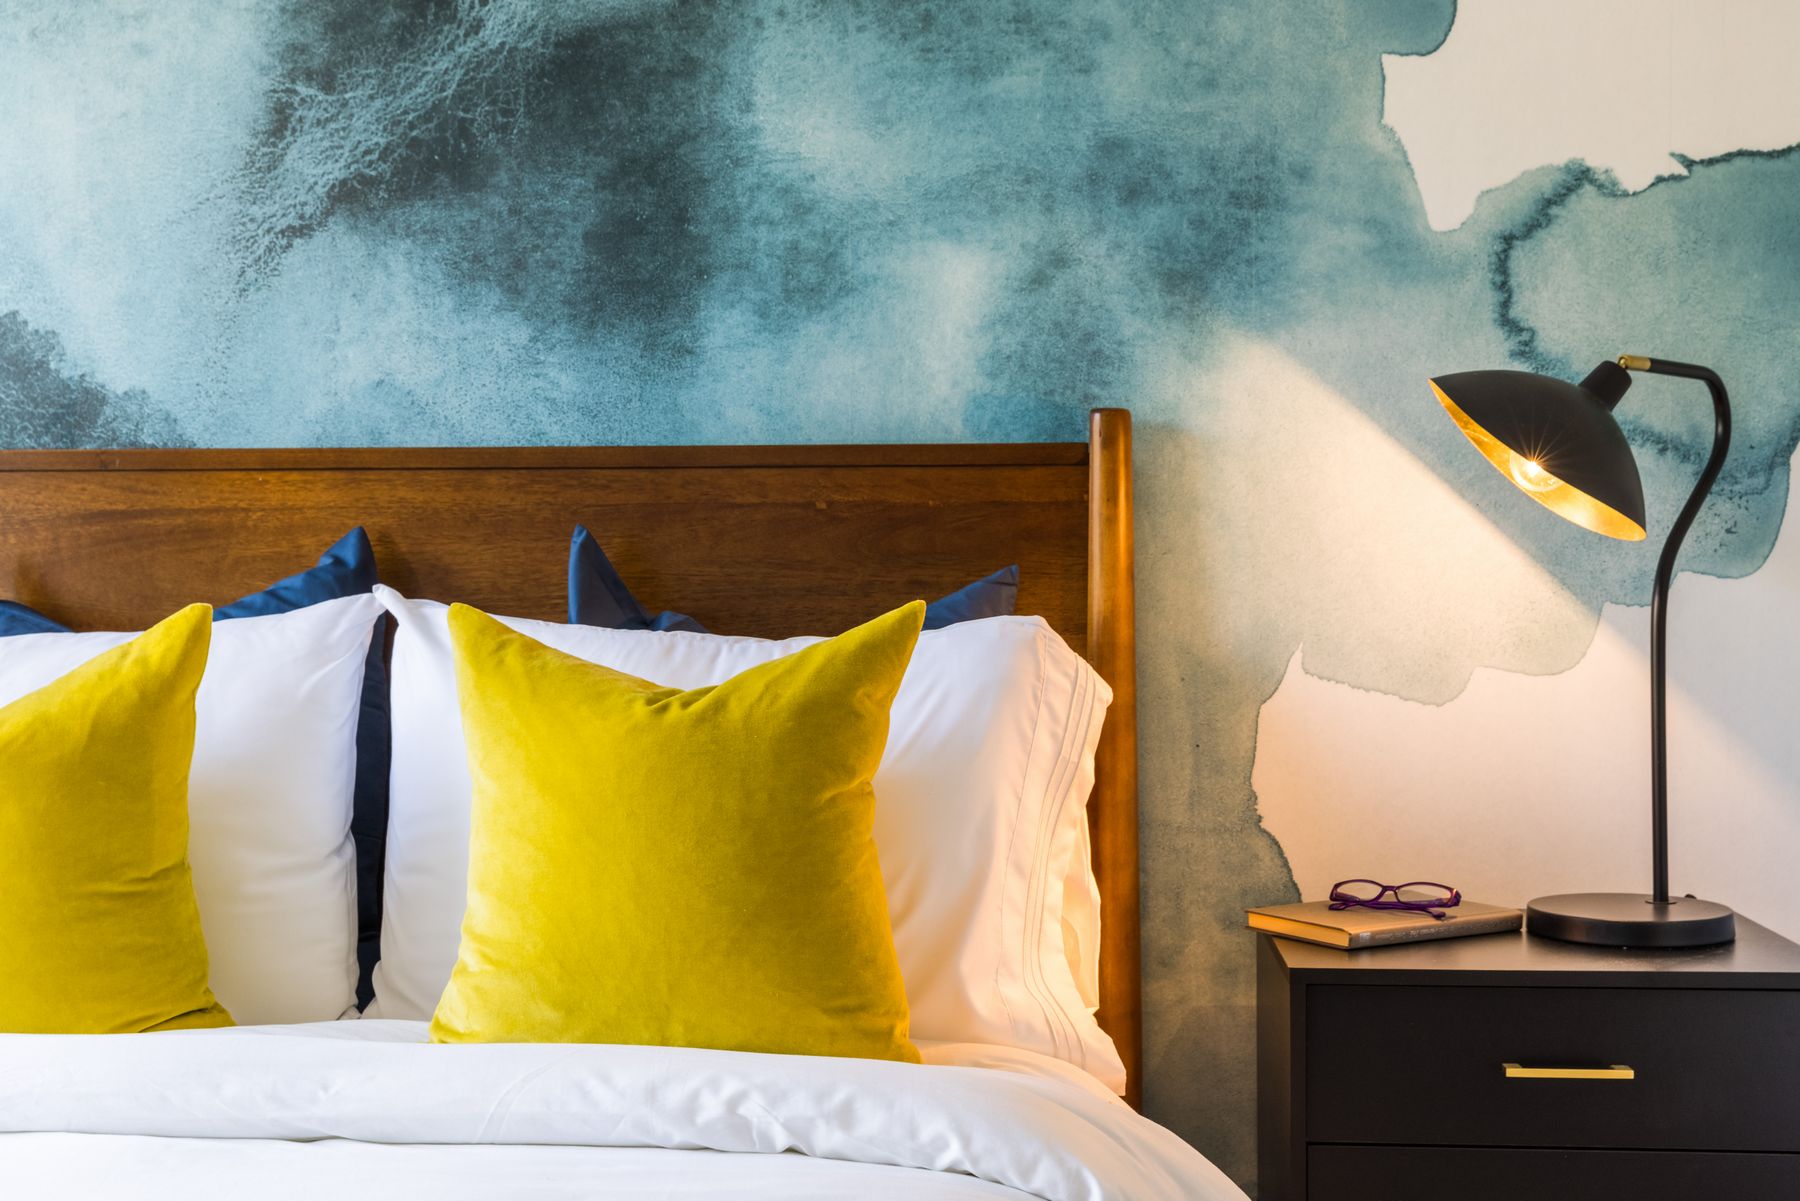 Detail of modern bed corner with yellow, white and dark teal pillows, dark wood night stand with light, book and glasses, teal and white watercolor wall background